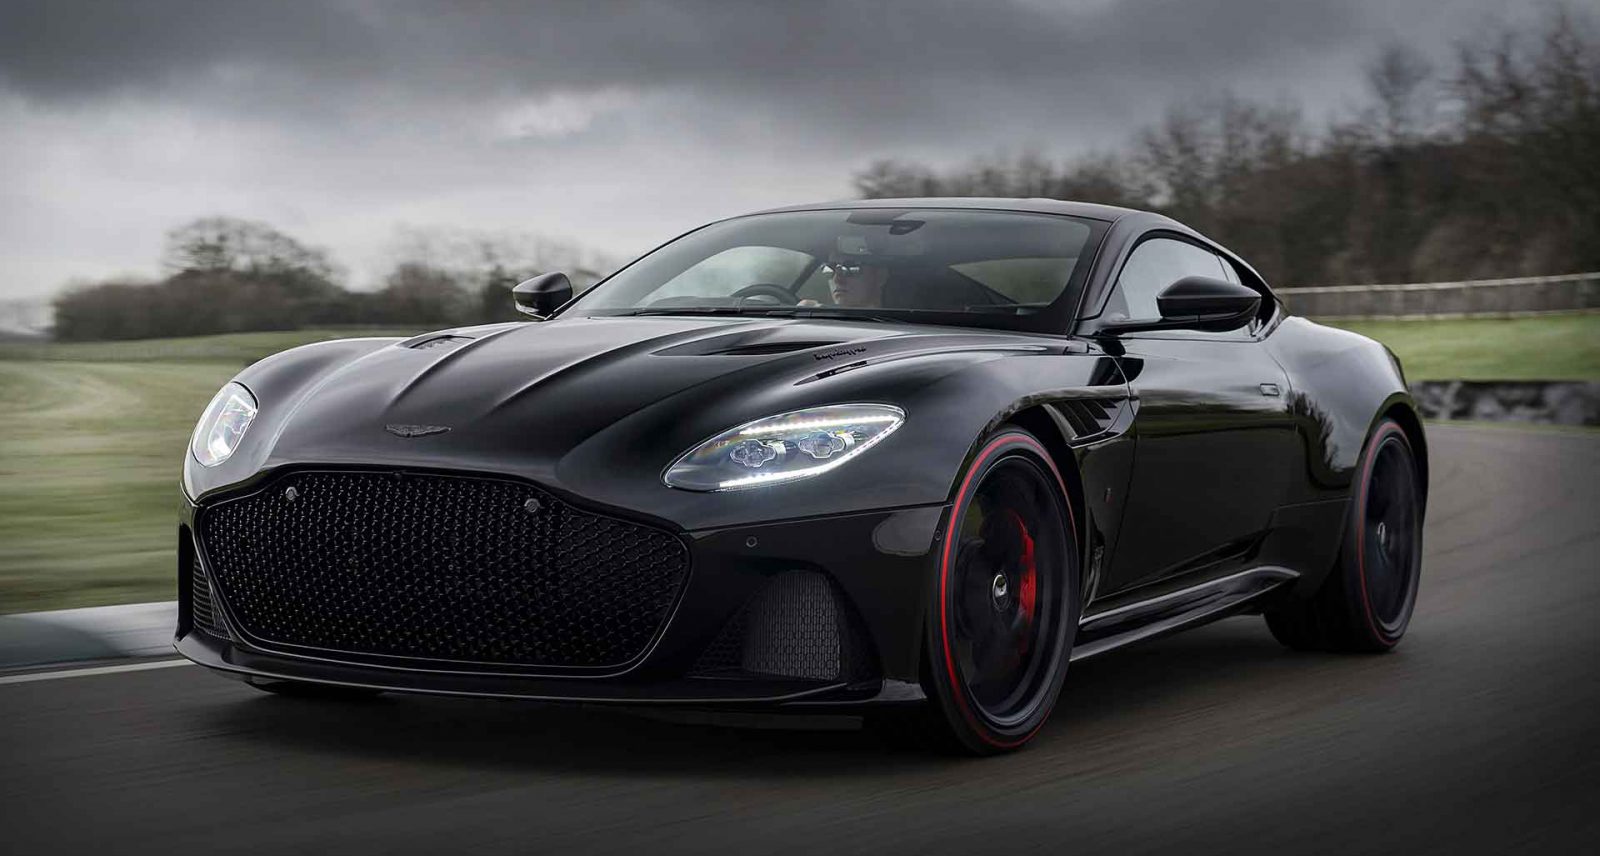 Buy Aston Martin's 715-Horsepower TAG Heuer DBS Superleggera, and They'll Throw In a Free Watch